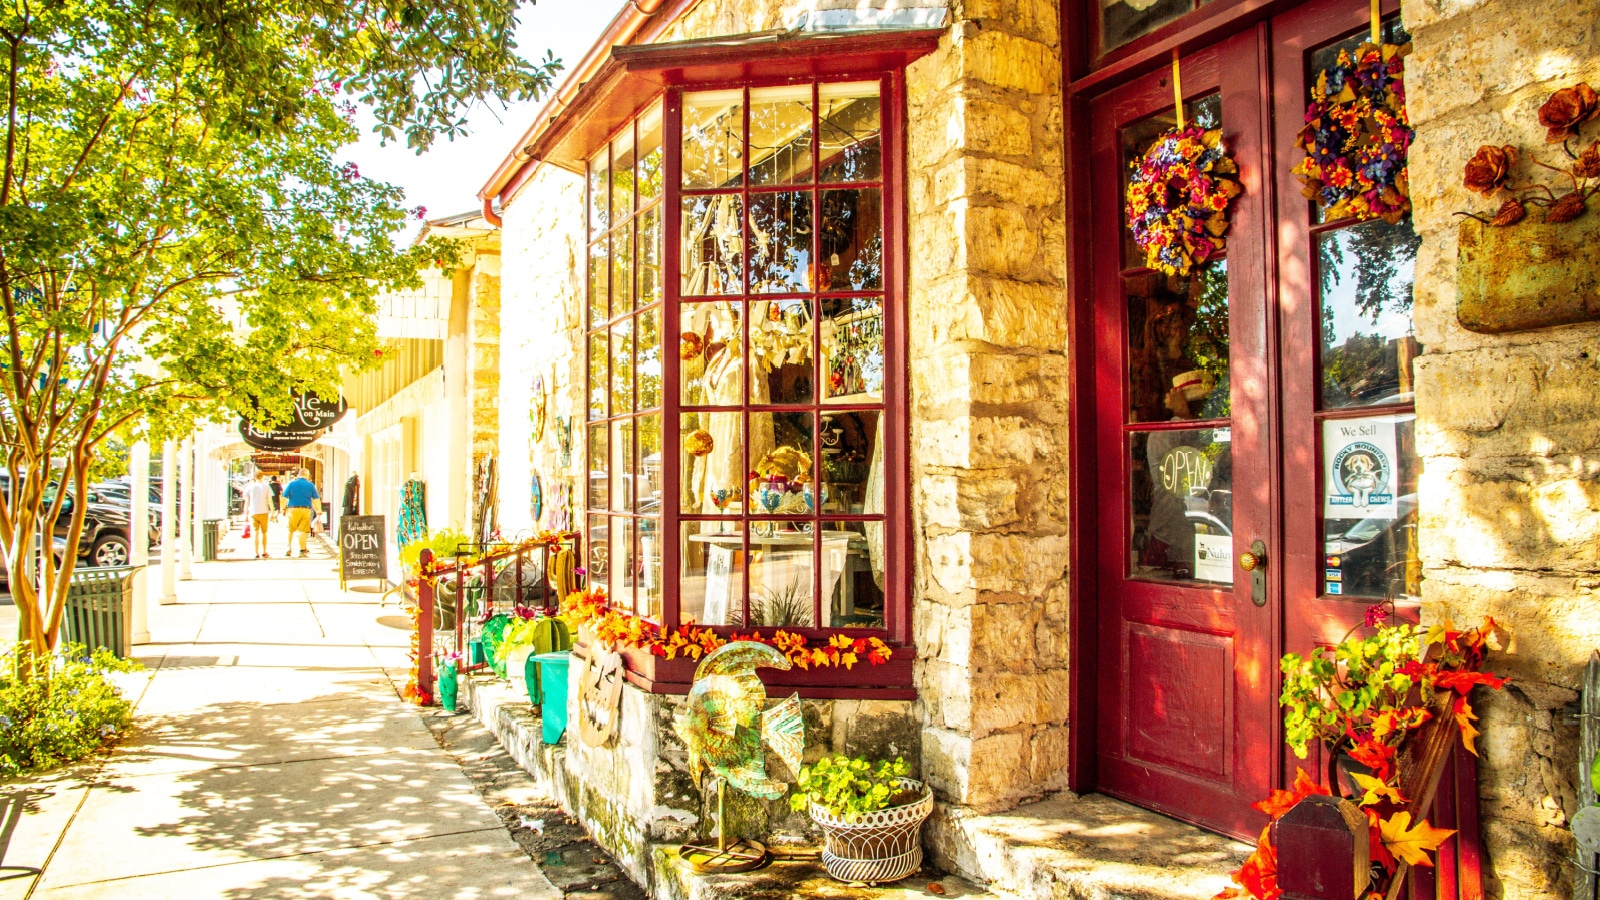 Fredericksburg, Texas, USA-07 September 2019 : The Main Street in Frederiksburg, Texas, also known as "The Magic Mile", with retail stores and poeple walking